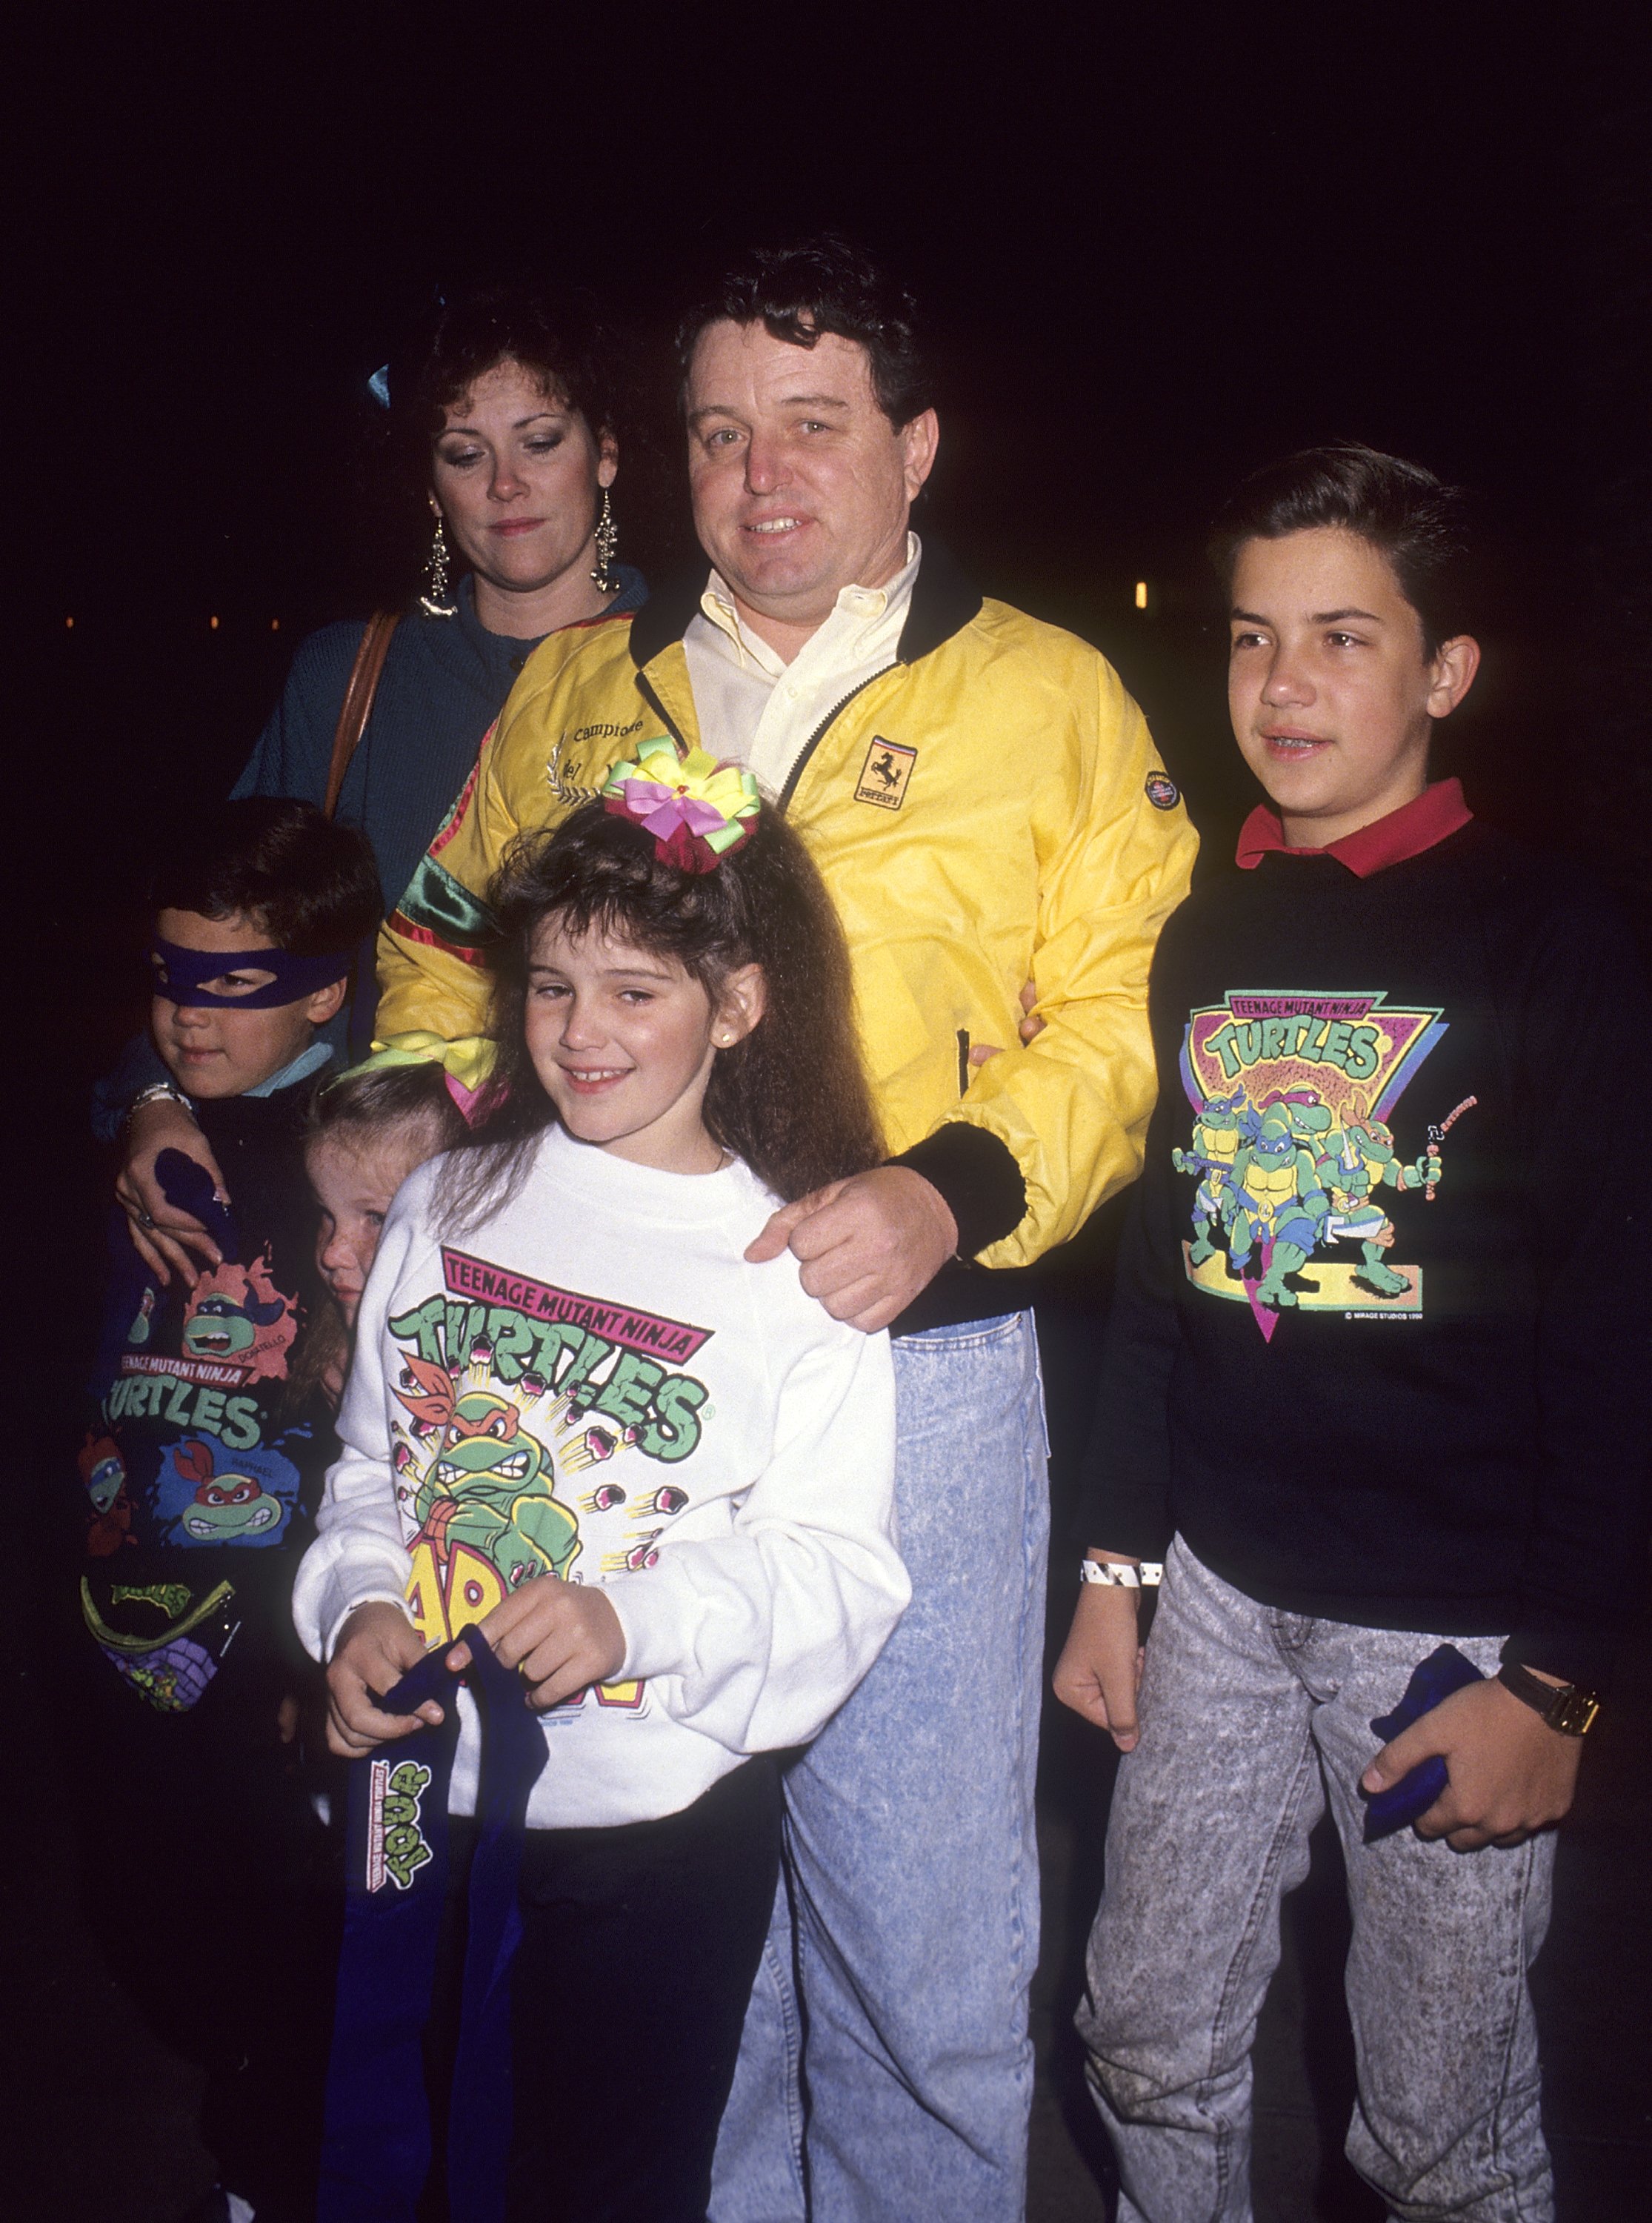 Actor Jerry Mathers, wife Rhonda and children attend the Teenage Mutant Ninja Turtle's "Coming Out of Their Shells" Rock & Roll Tour on November 21, 1990 at the Universal Amphitheatre in Universal City, California. | Source: Getty Images 